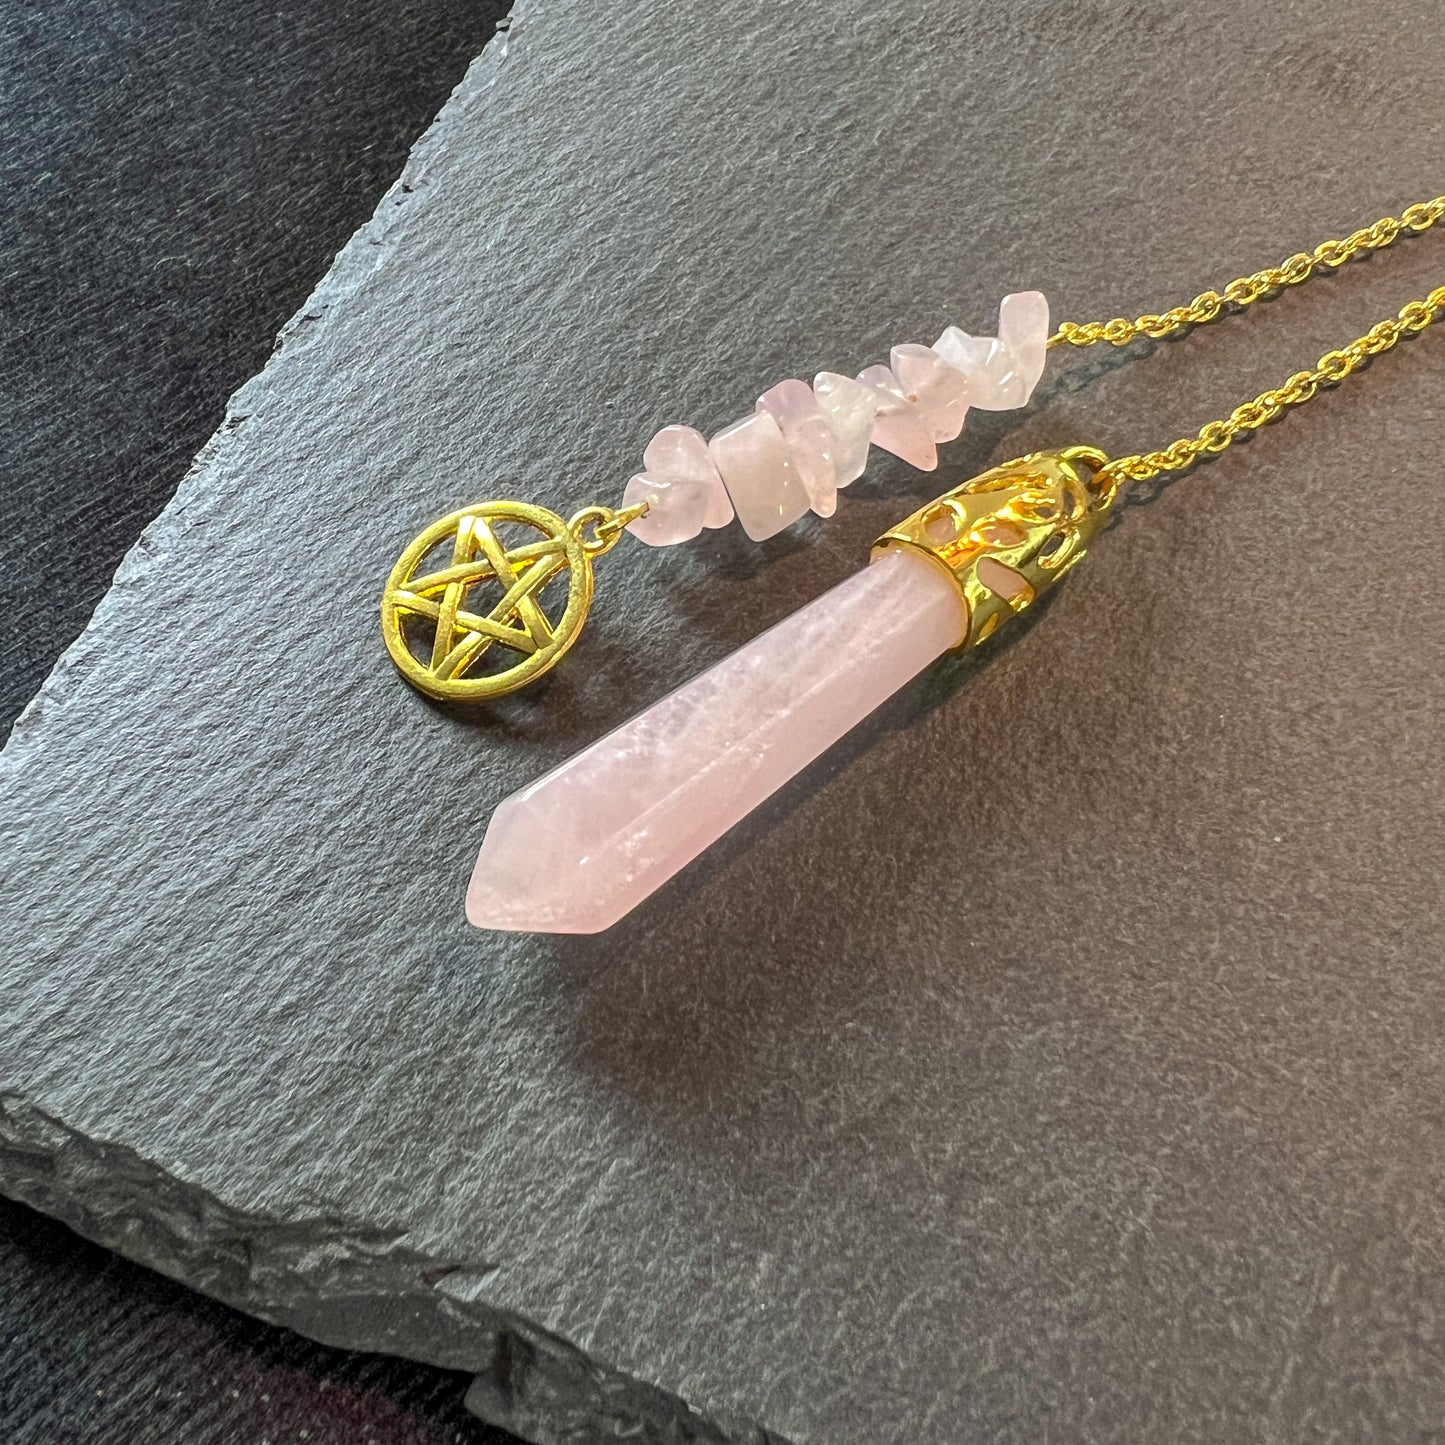 Gemstone pendulum rose quartz and pentacle gold tone wiccan divination tool for pagan witchcraft